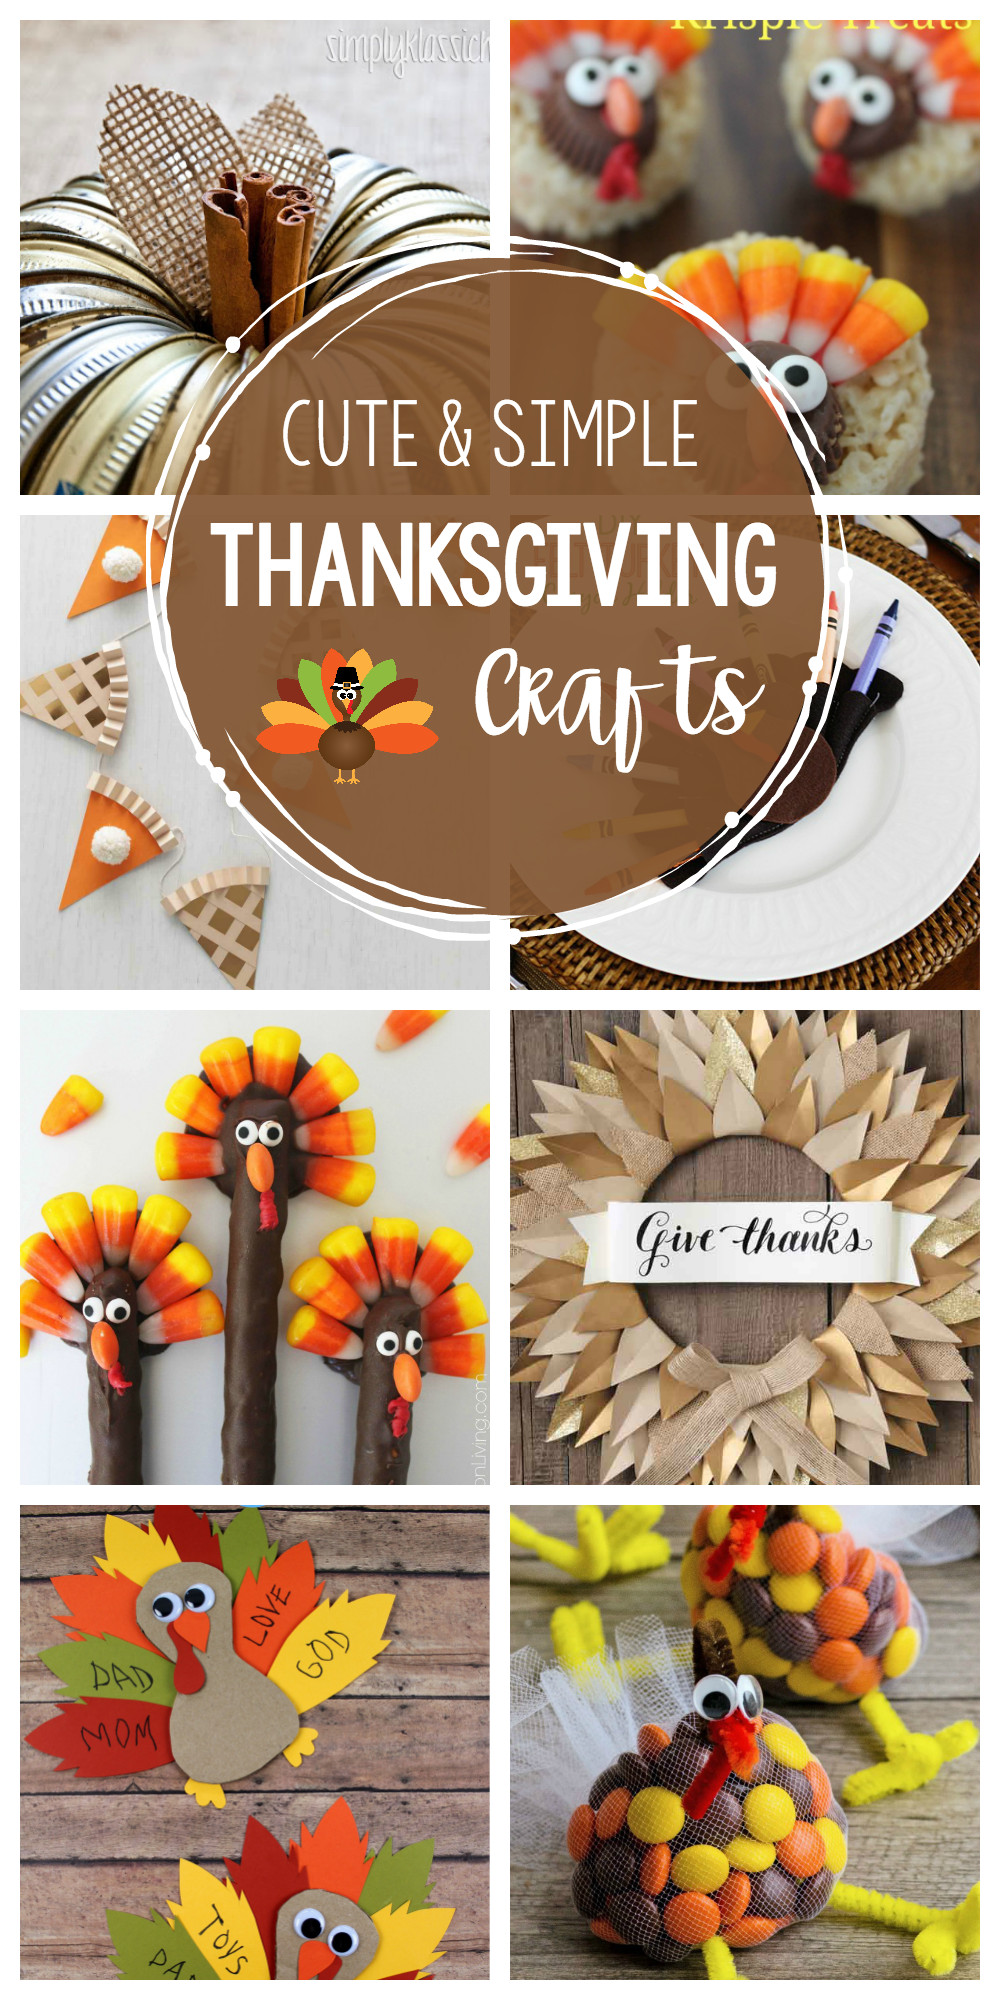 Thanksgiving Crafts For Teens
 Fun & Simple Thanksgiving Crafts to Make This Year Crazy